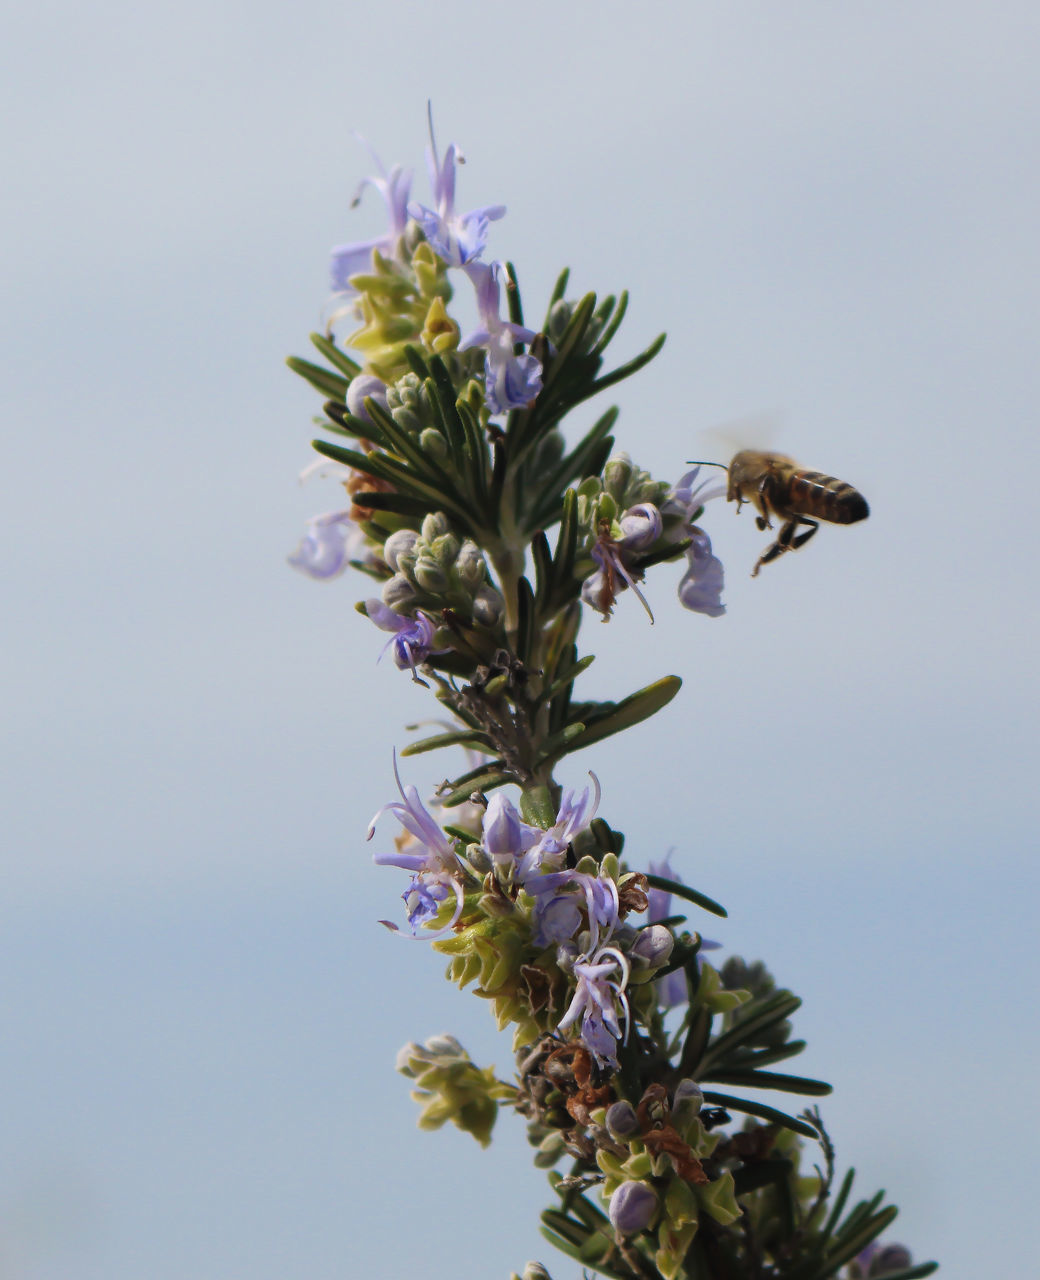 CLOSE-UP OF BEE POLLINATING ON PURPLE FLOWER AGAINST SKY